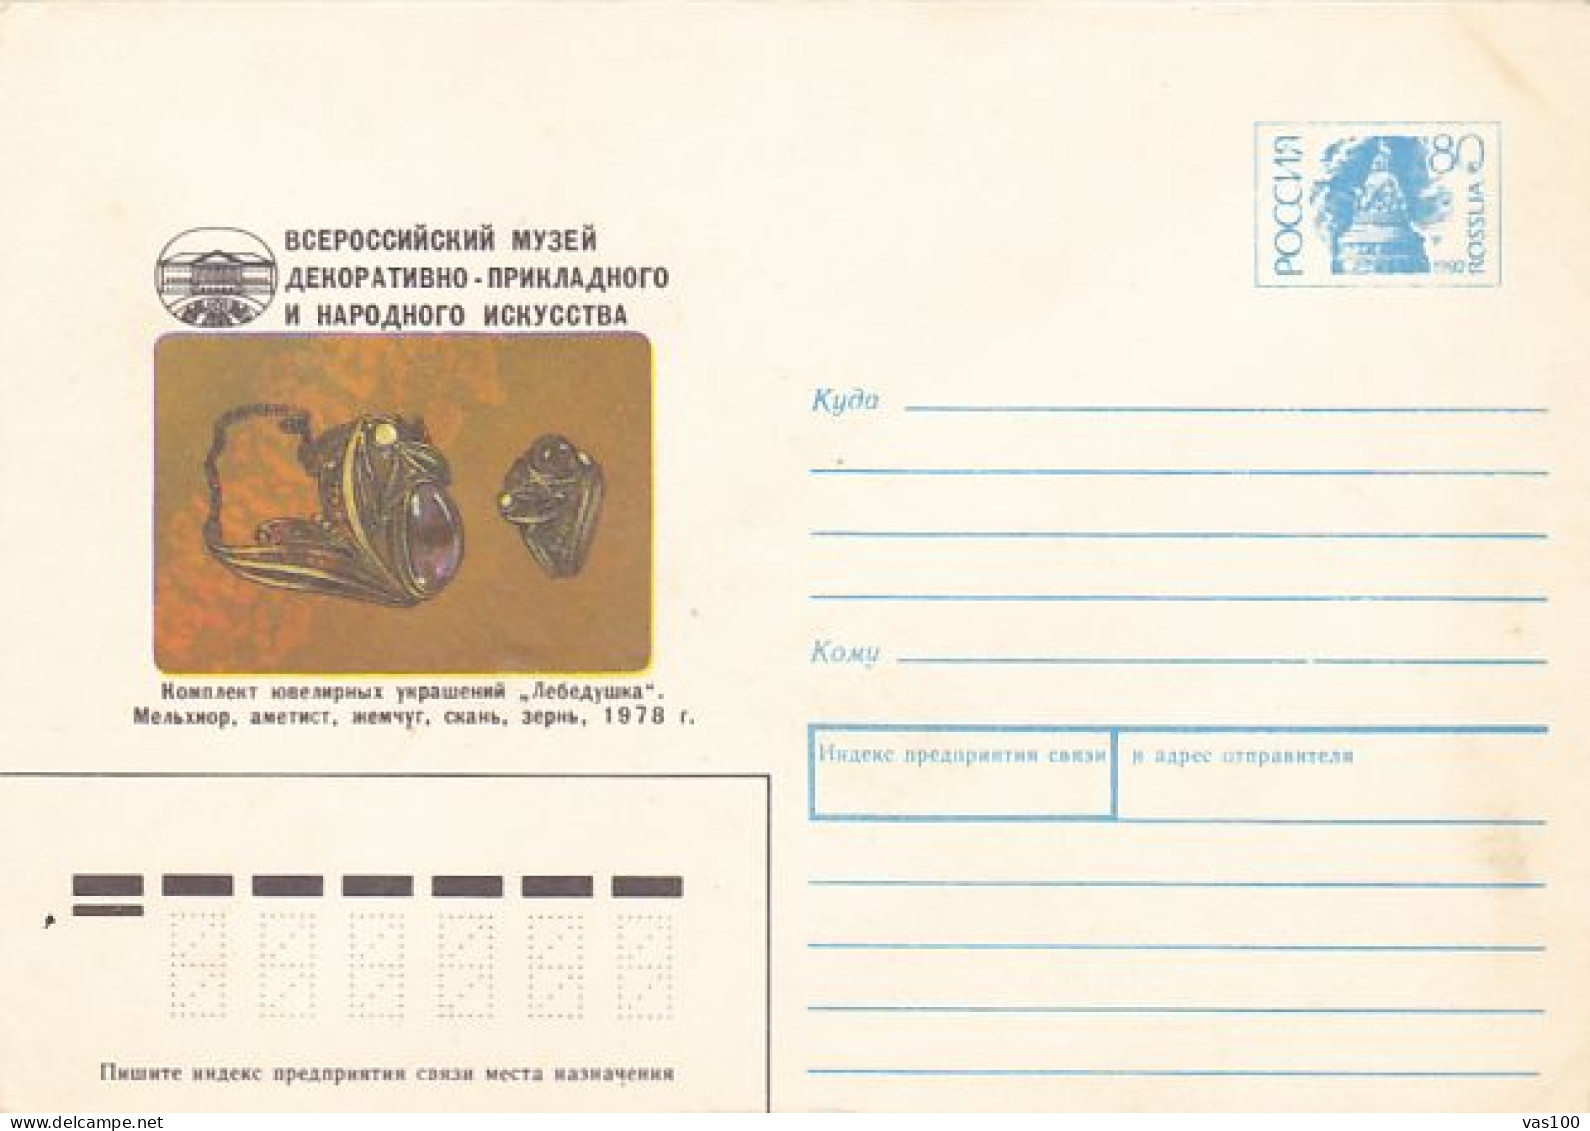 MOSCOW MUSEUM, JEWELRIES, COVER STATIONERY, ENTIER POSTAL, 1992, RUSSIA - Ganzsachen